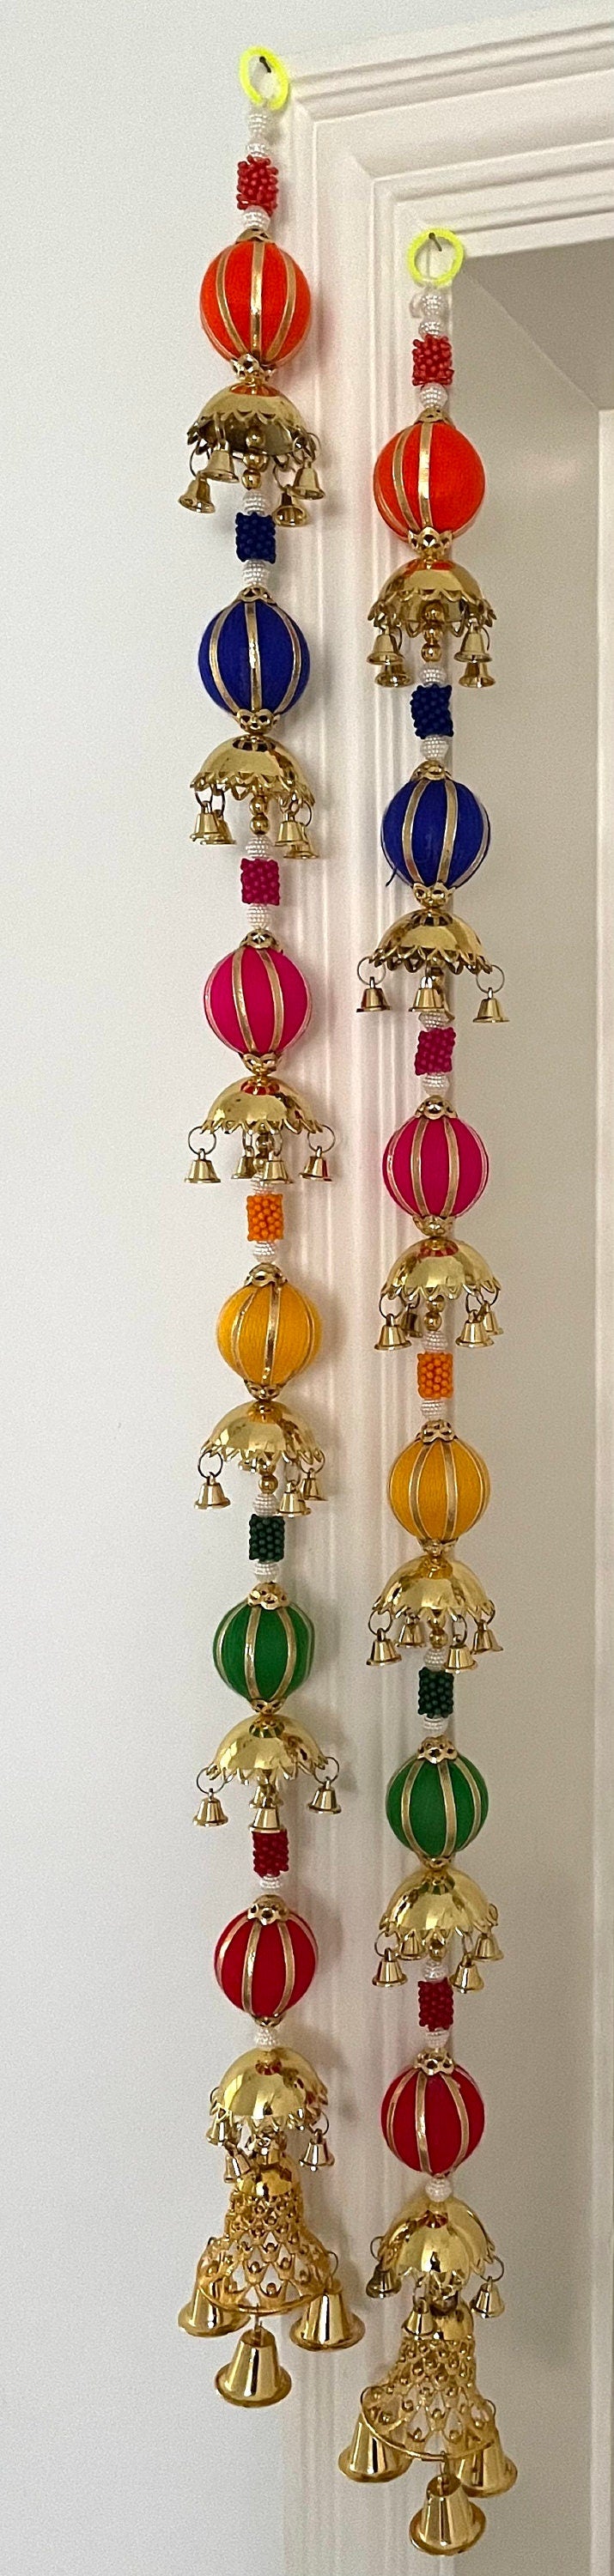 Pair of Door Hanging Strings for Diwali Decoration Outdoor Backdrops Event Weddings Home Decor New Home